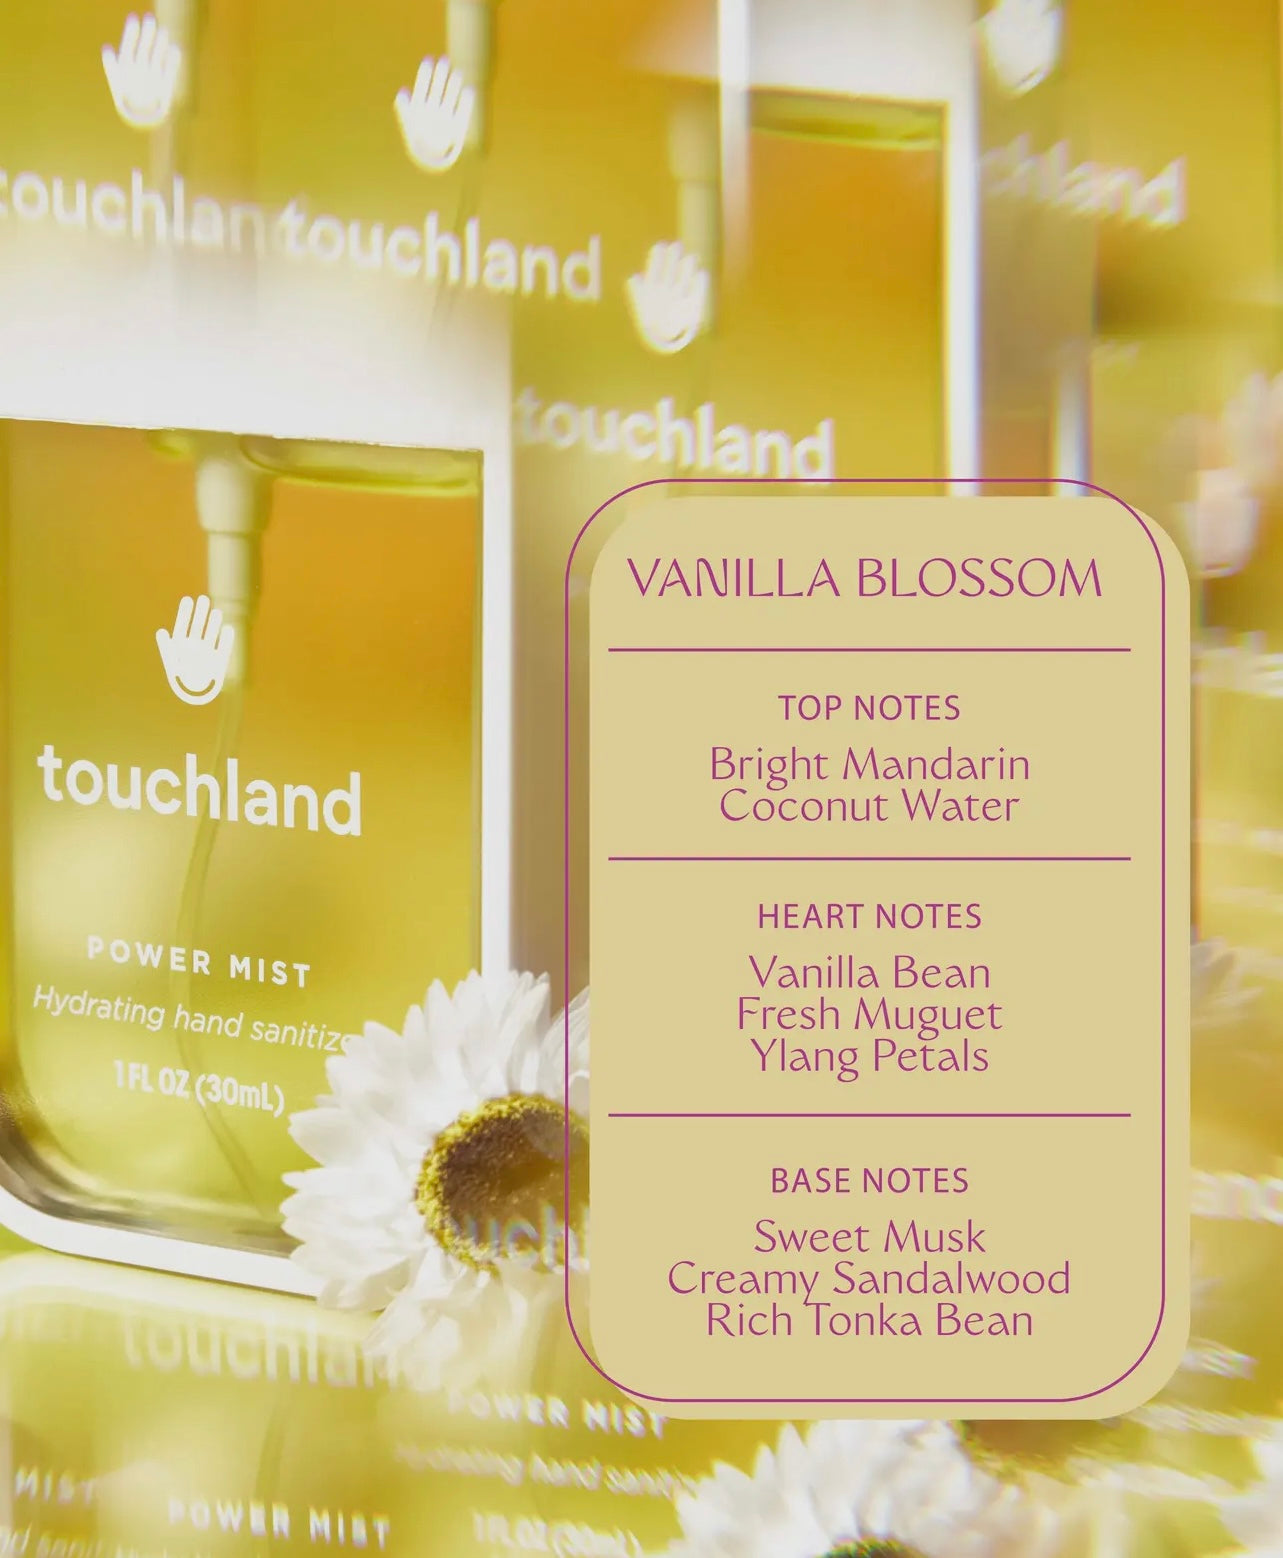 Touchland